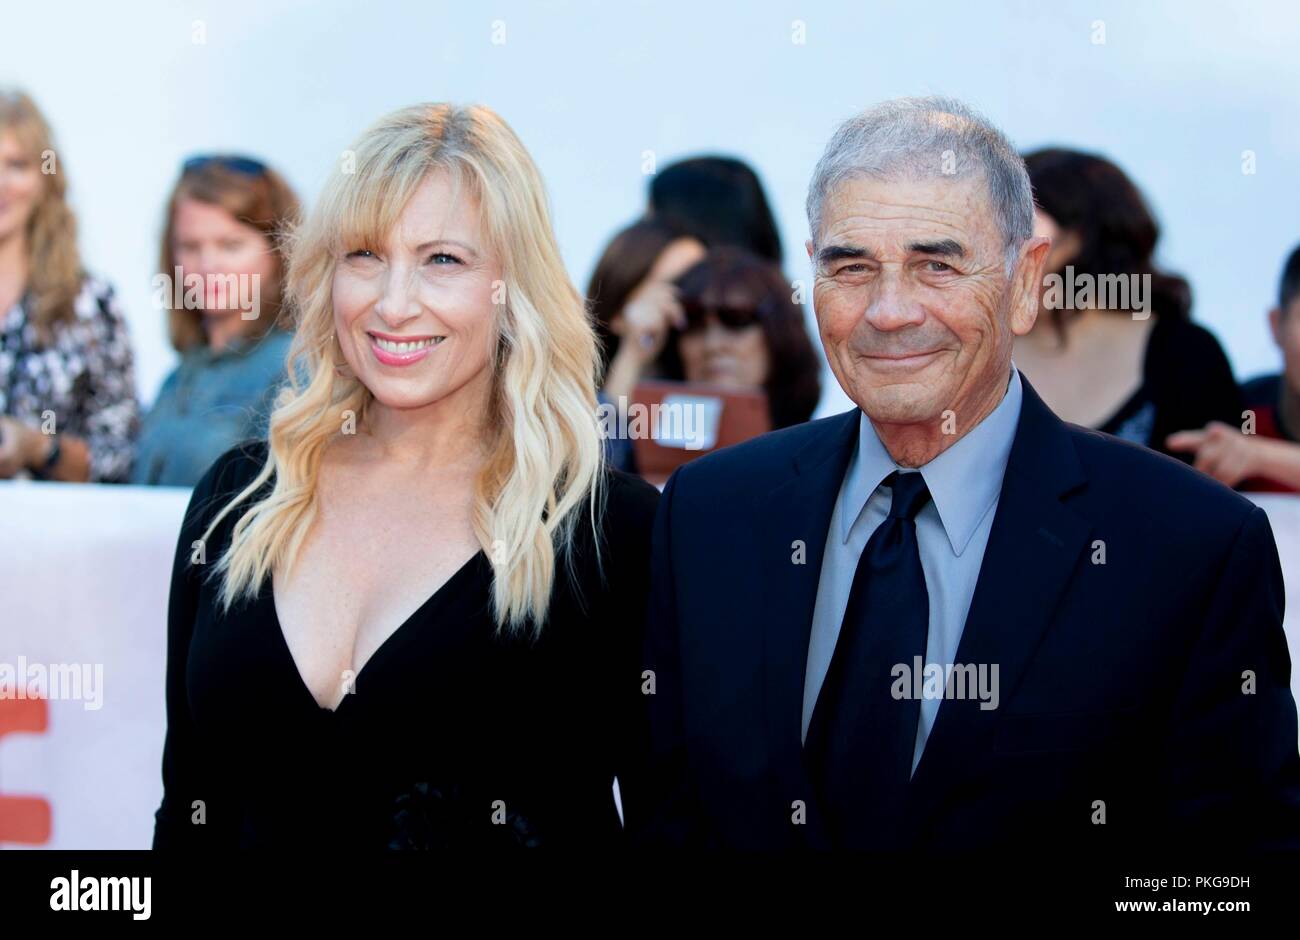 Robert Forster and Evie Forster attend the premiere of 'What They Said' during the 43rd Toronto International Film Festival, tiff, at Roy Thomson Hall in Toronto, Canada, on 12 September 2018. | usage worldwide Stock Photo